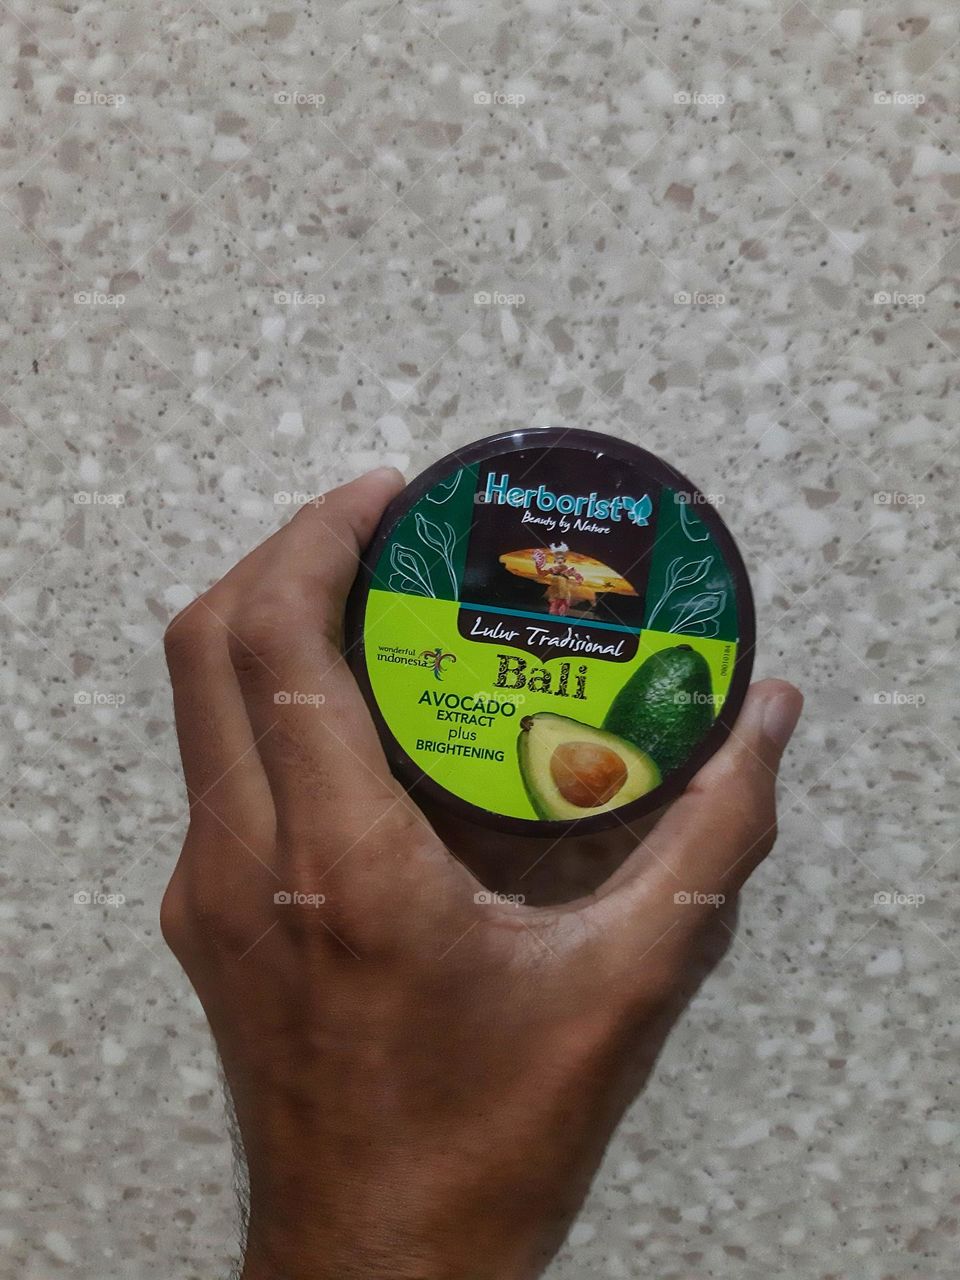 Herborist is the name of this local product of body scrub from Indonesia